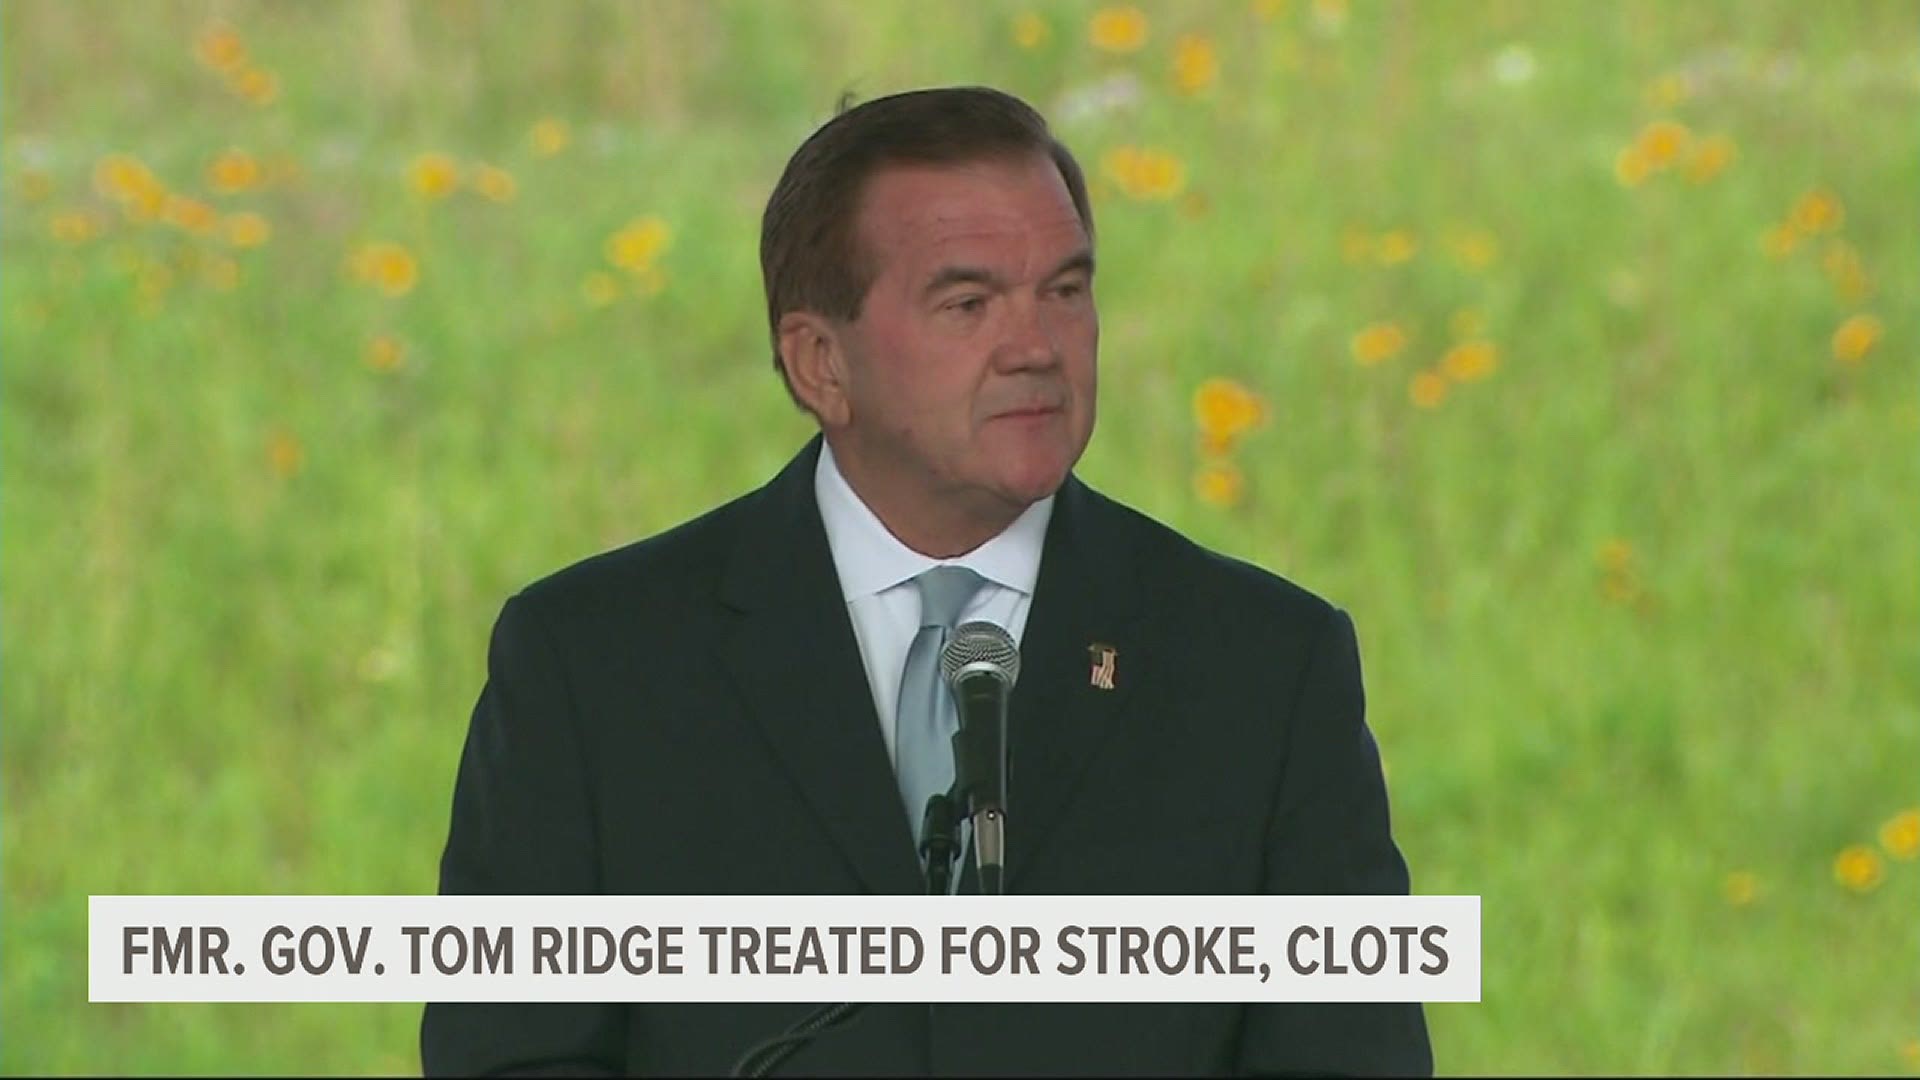 Ridge was taken by ambulance on Wednesday from his home in Bethesda, Maryland, to a hospital.